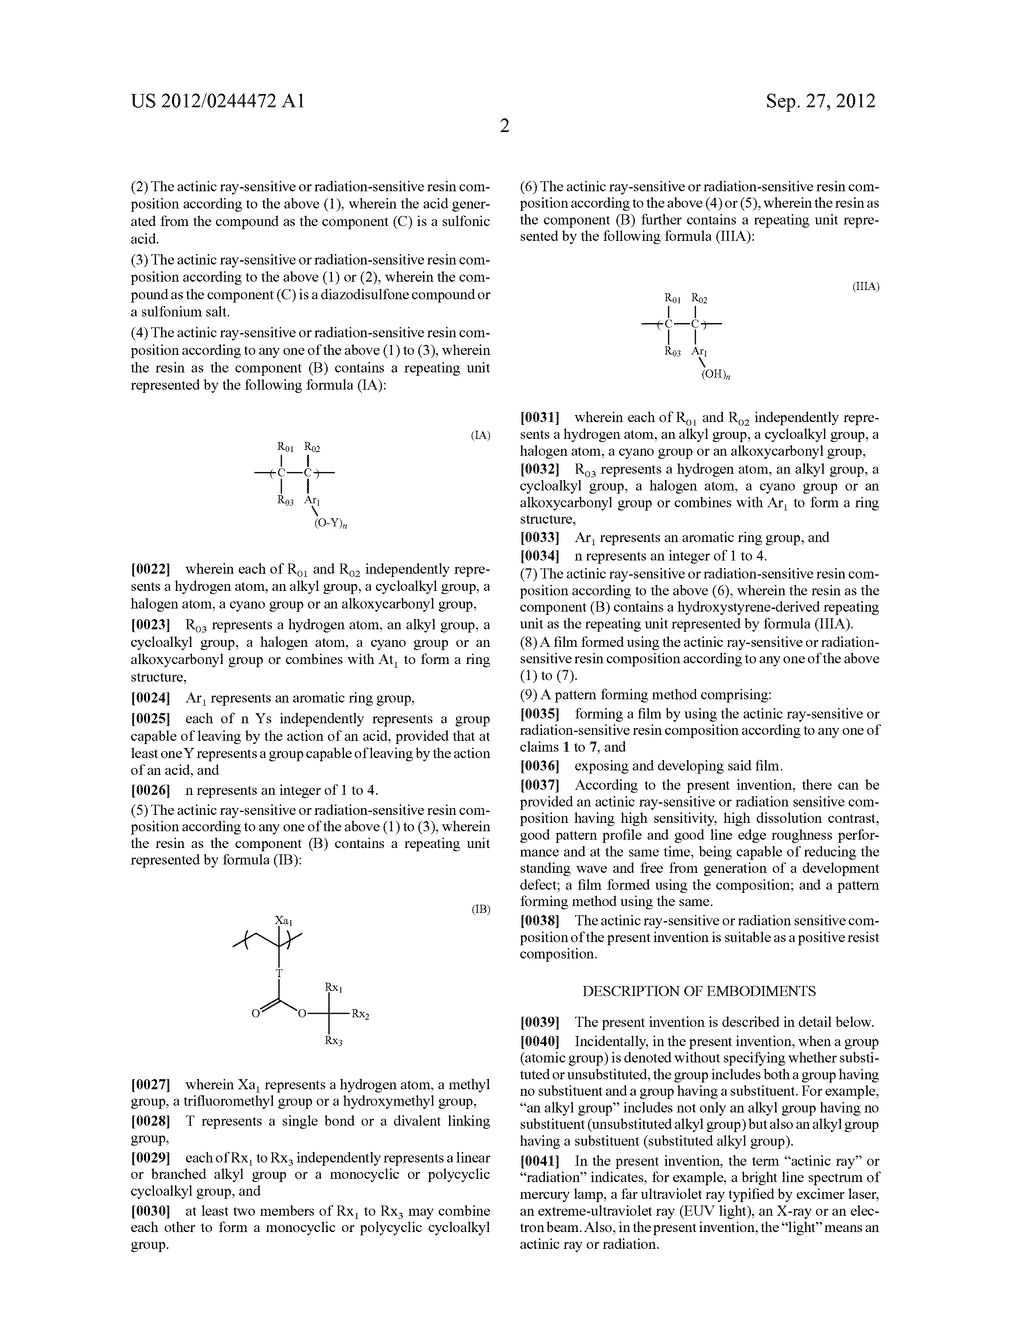 ACTINIC RAY-SENSITIVE OR RADIATION-SENSITIVE RESIN COMPOSITION, FILM     FORMED USING THE COMPOSITION AND PATTERN FORMING METHOD USING THE SAME - diagram, schematic, and image 03